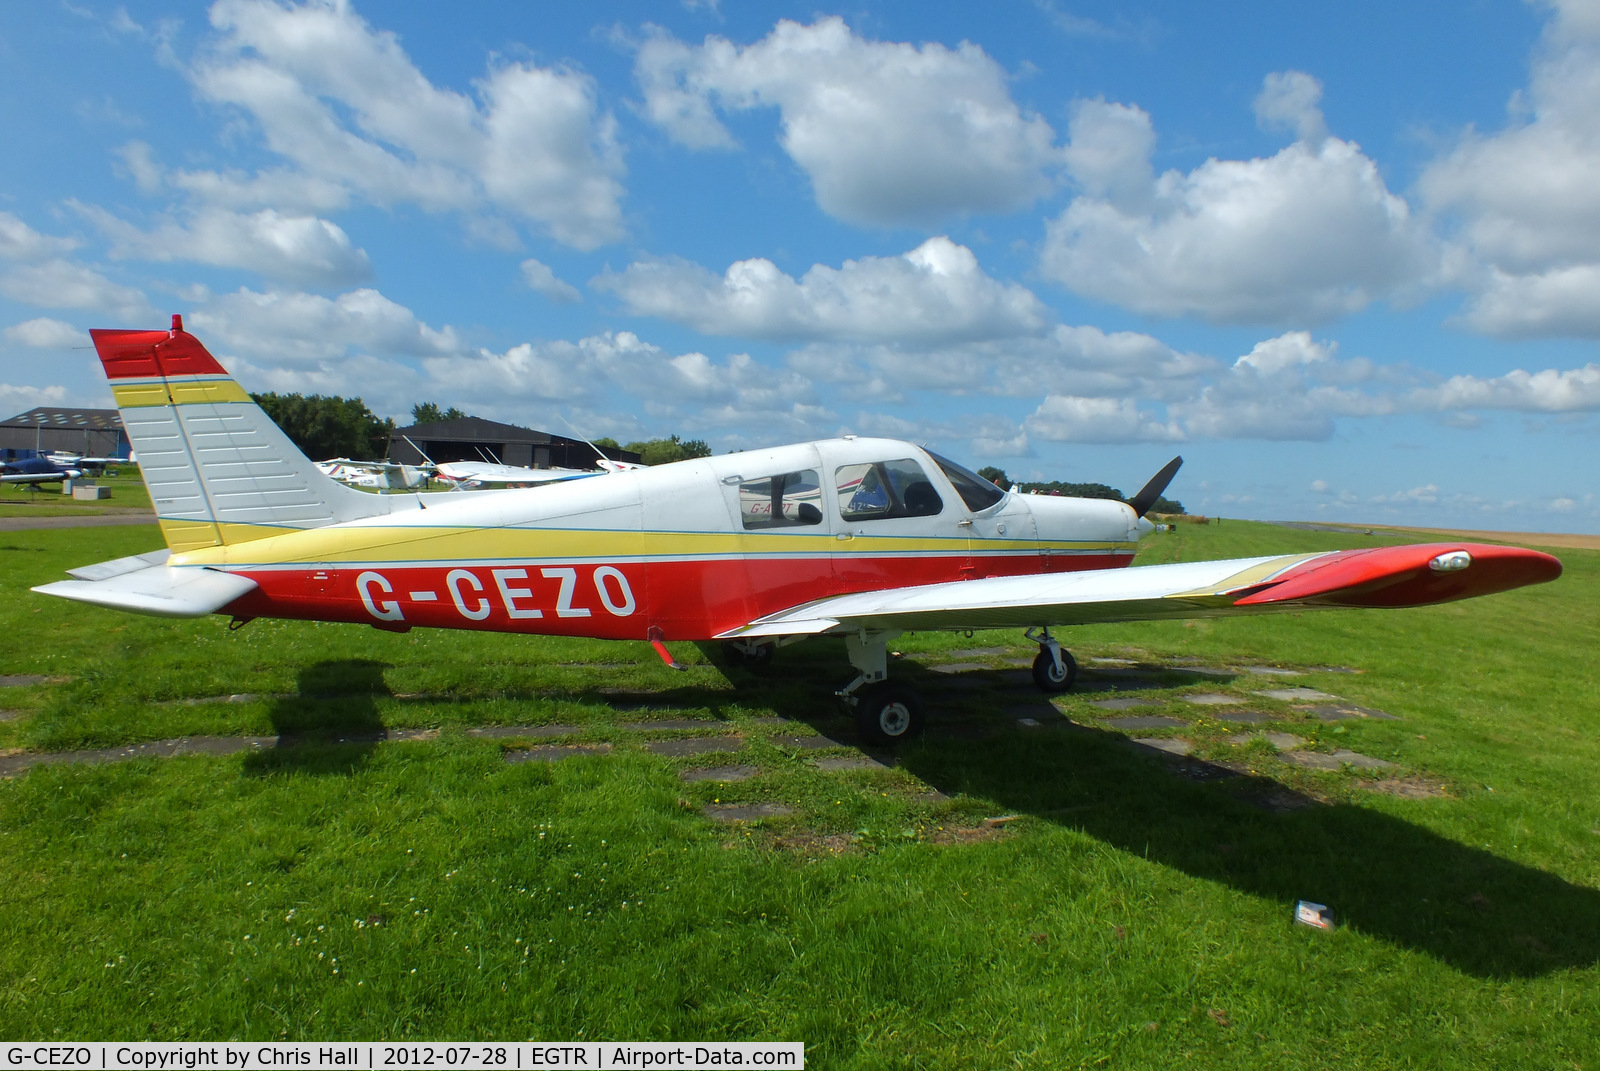 G-CEZO, 1989 Piper PA-28-161 Cadet C/N 28-41226, ex Cabair PA-28 now owned by Charley Ltd